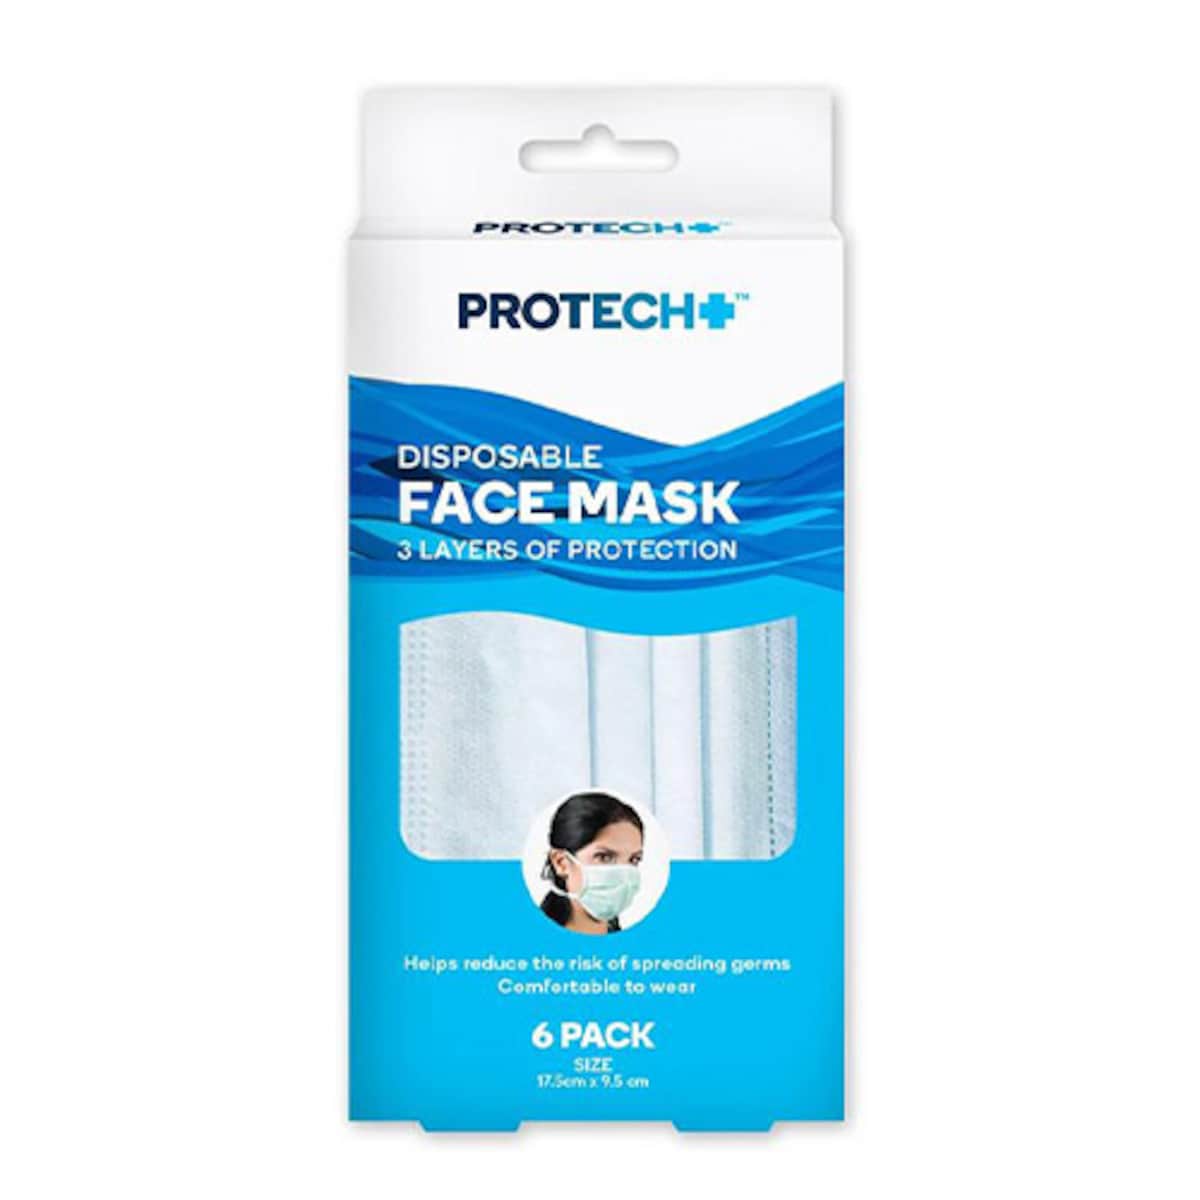 Protech Disposable Face Mask 6 Pack